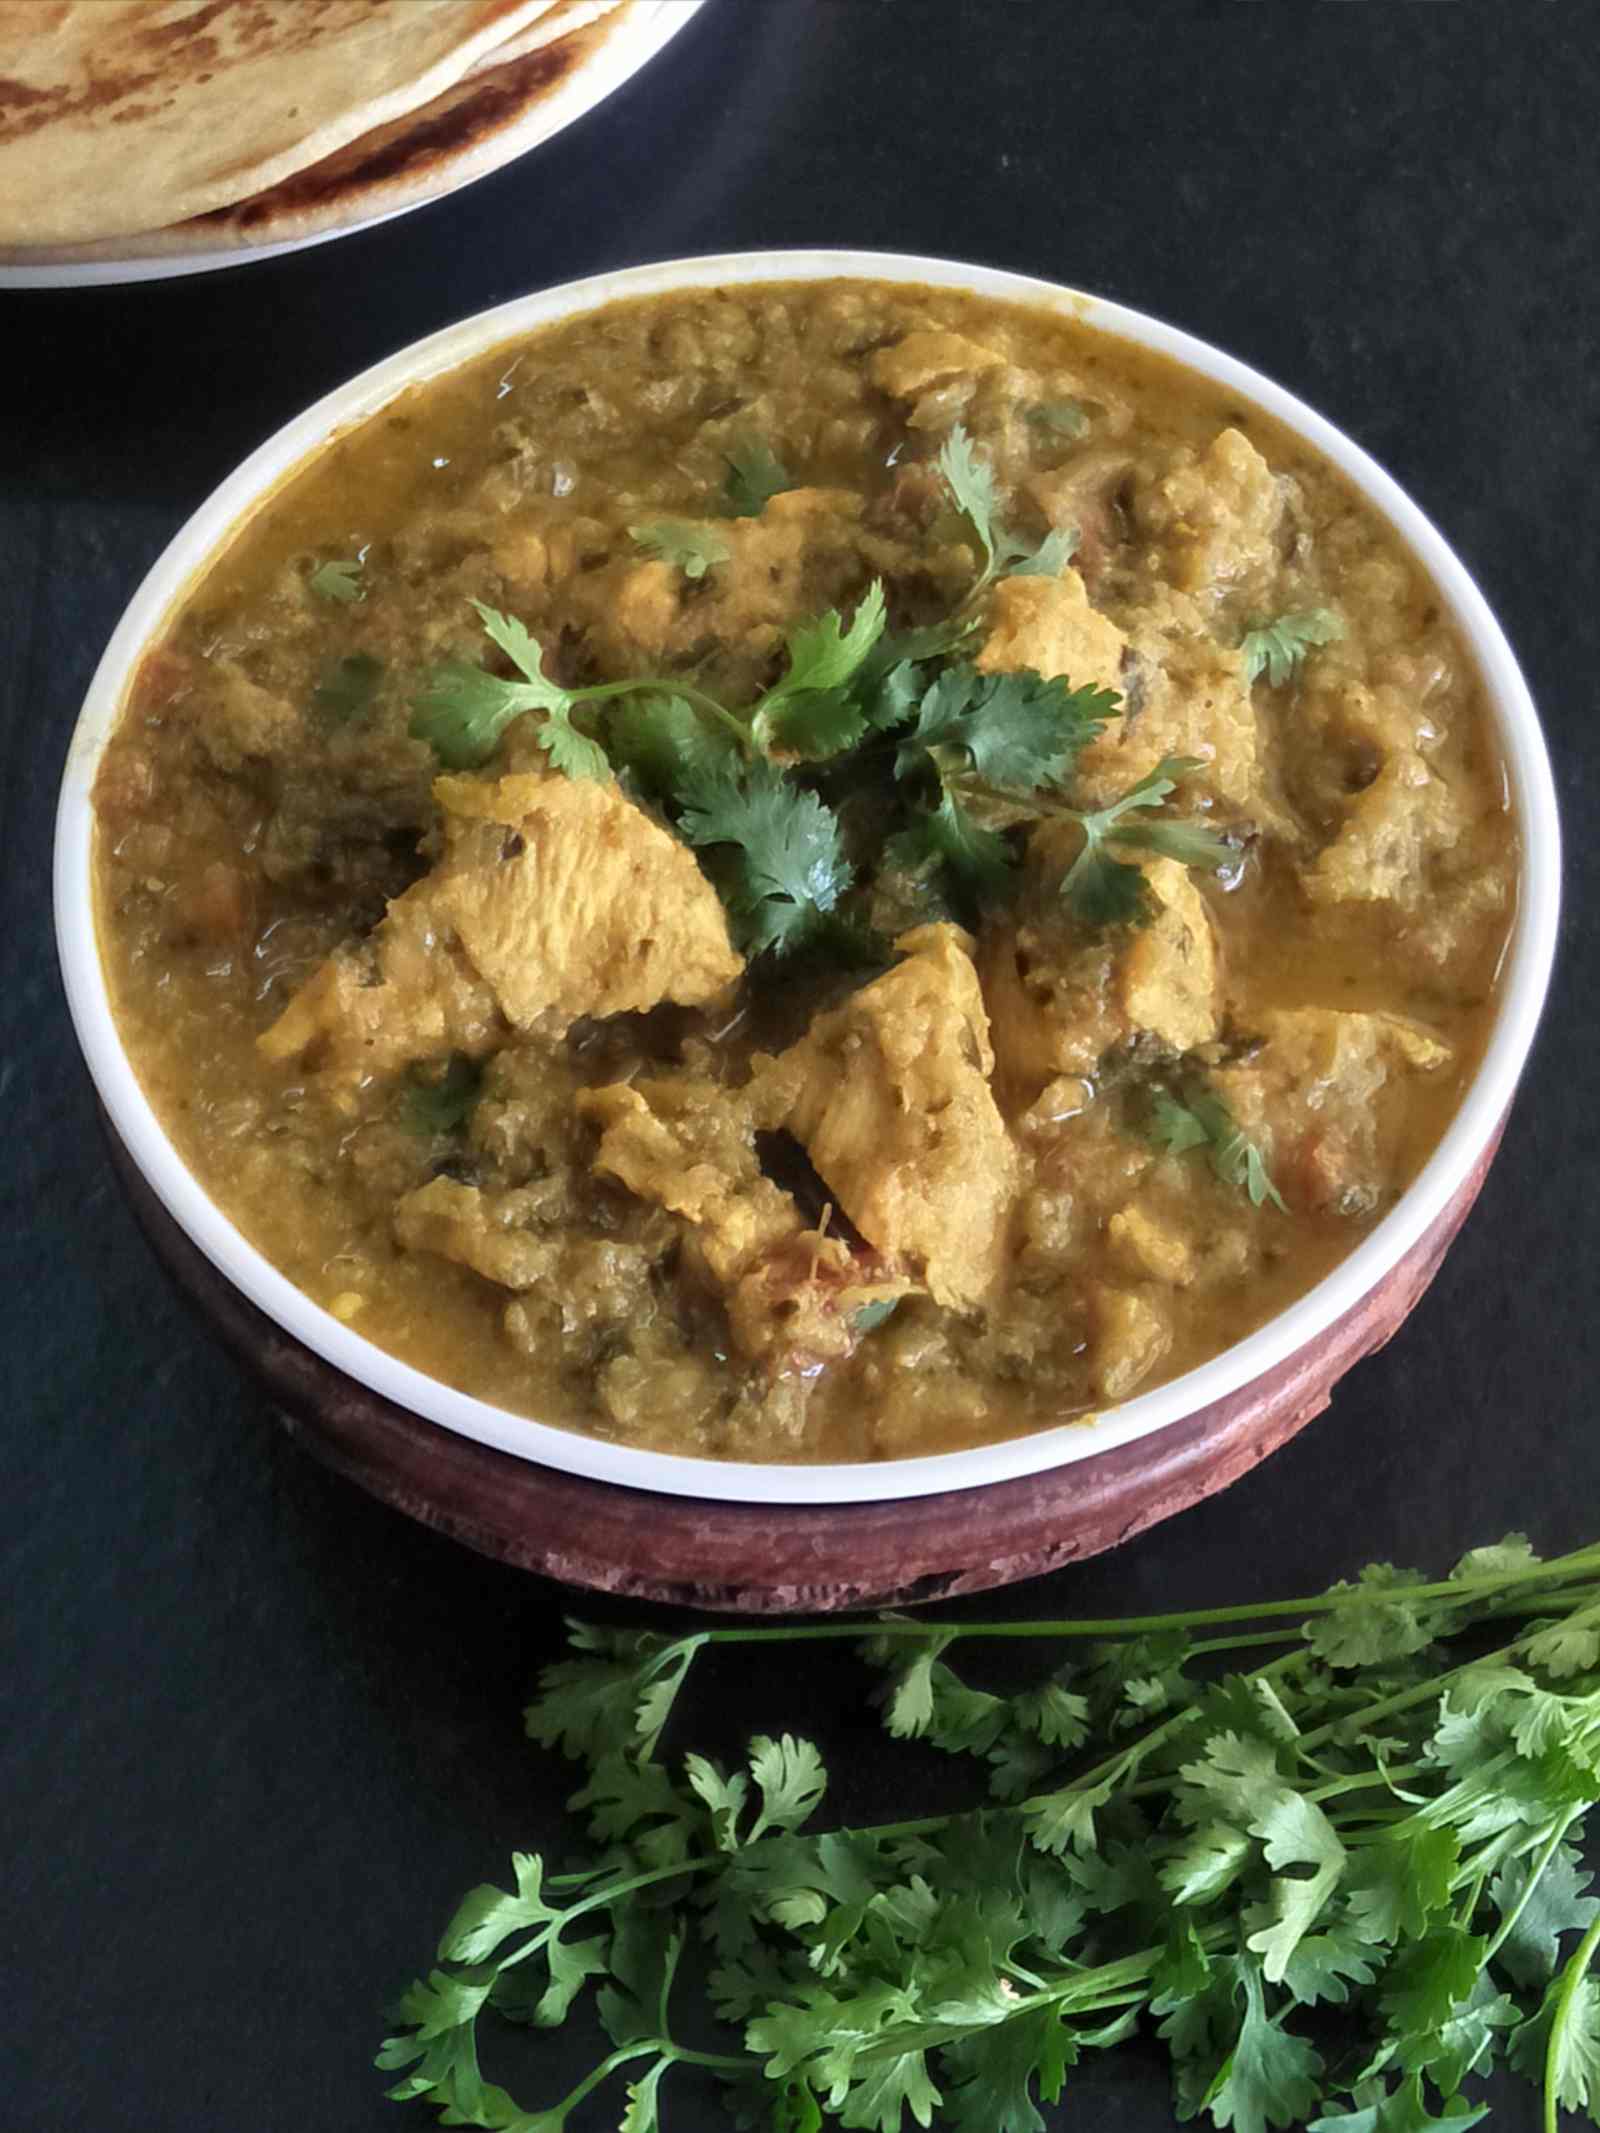 Delicious Methi Chicken Curry - Murgh Methi Curry Recipe